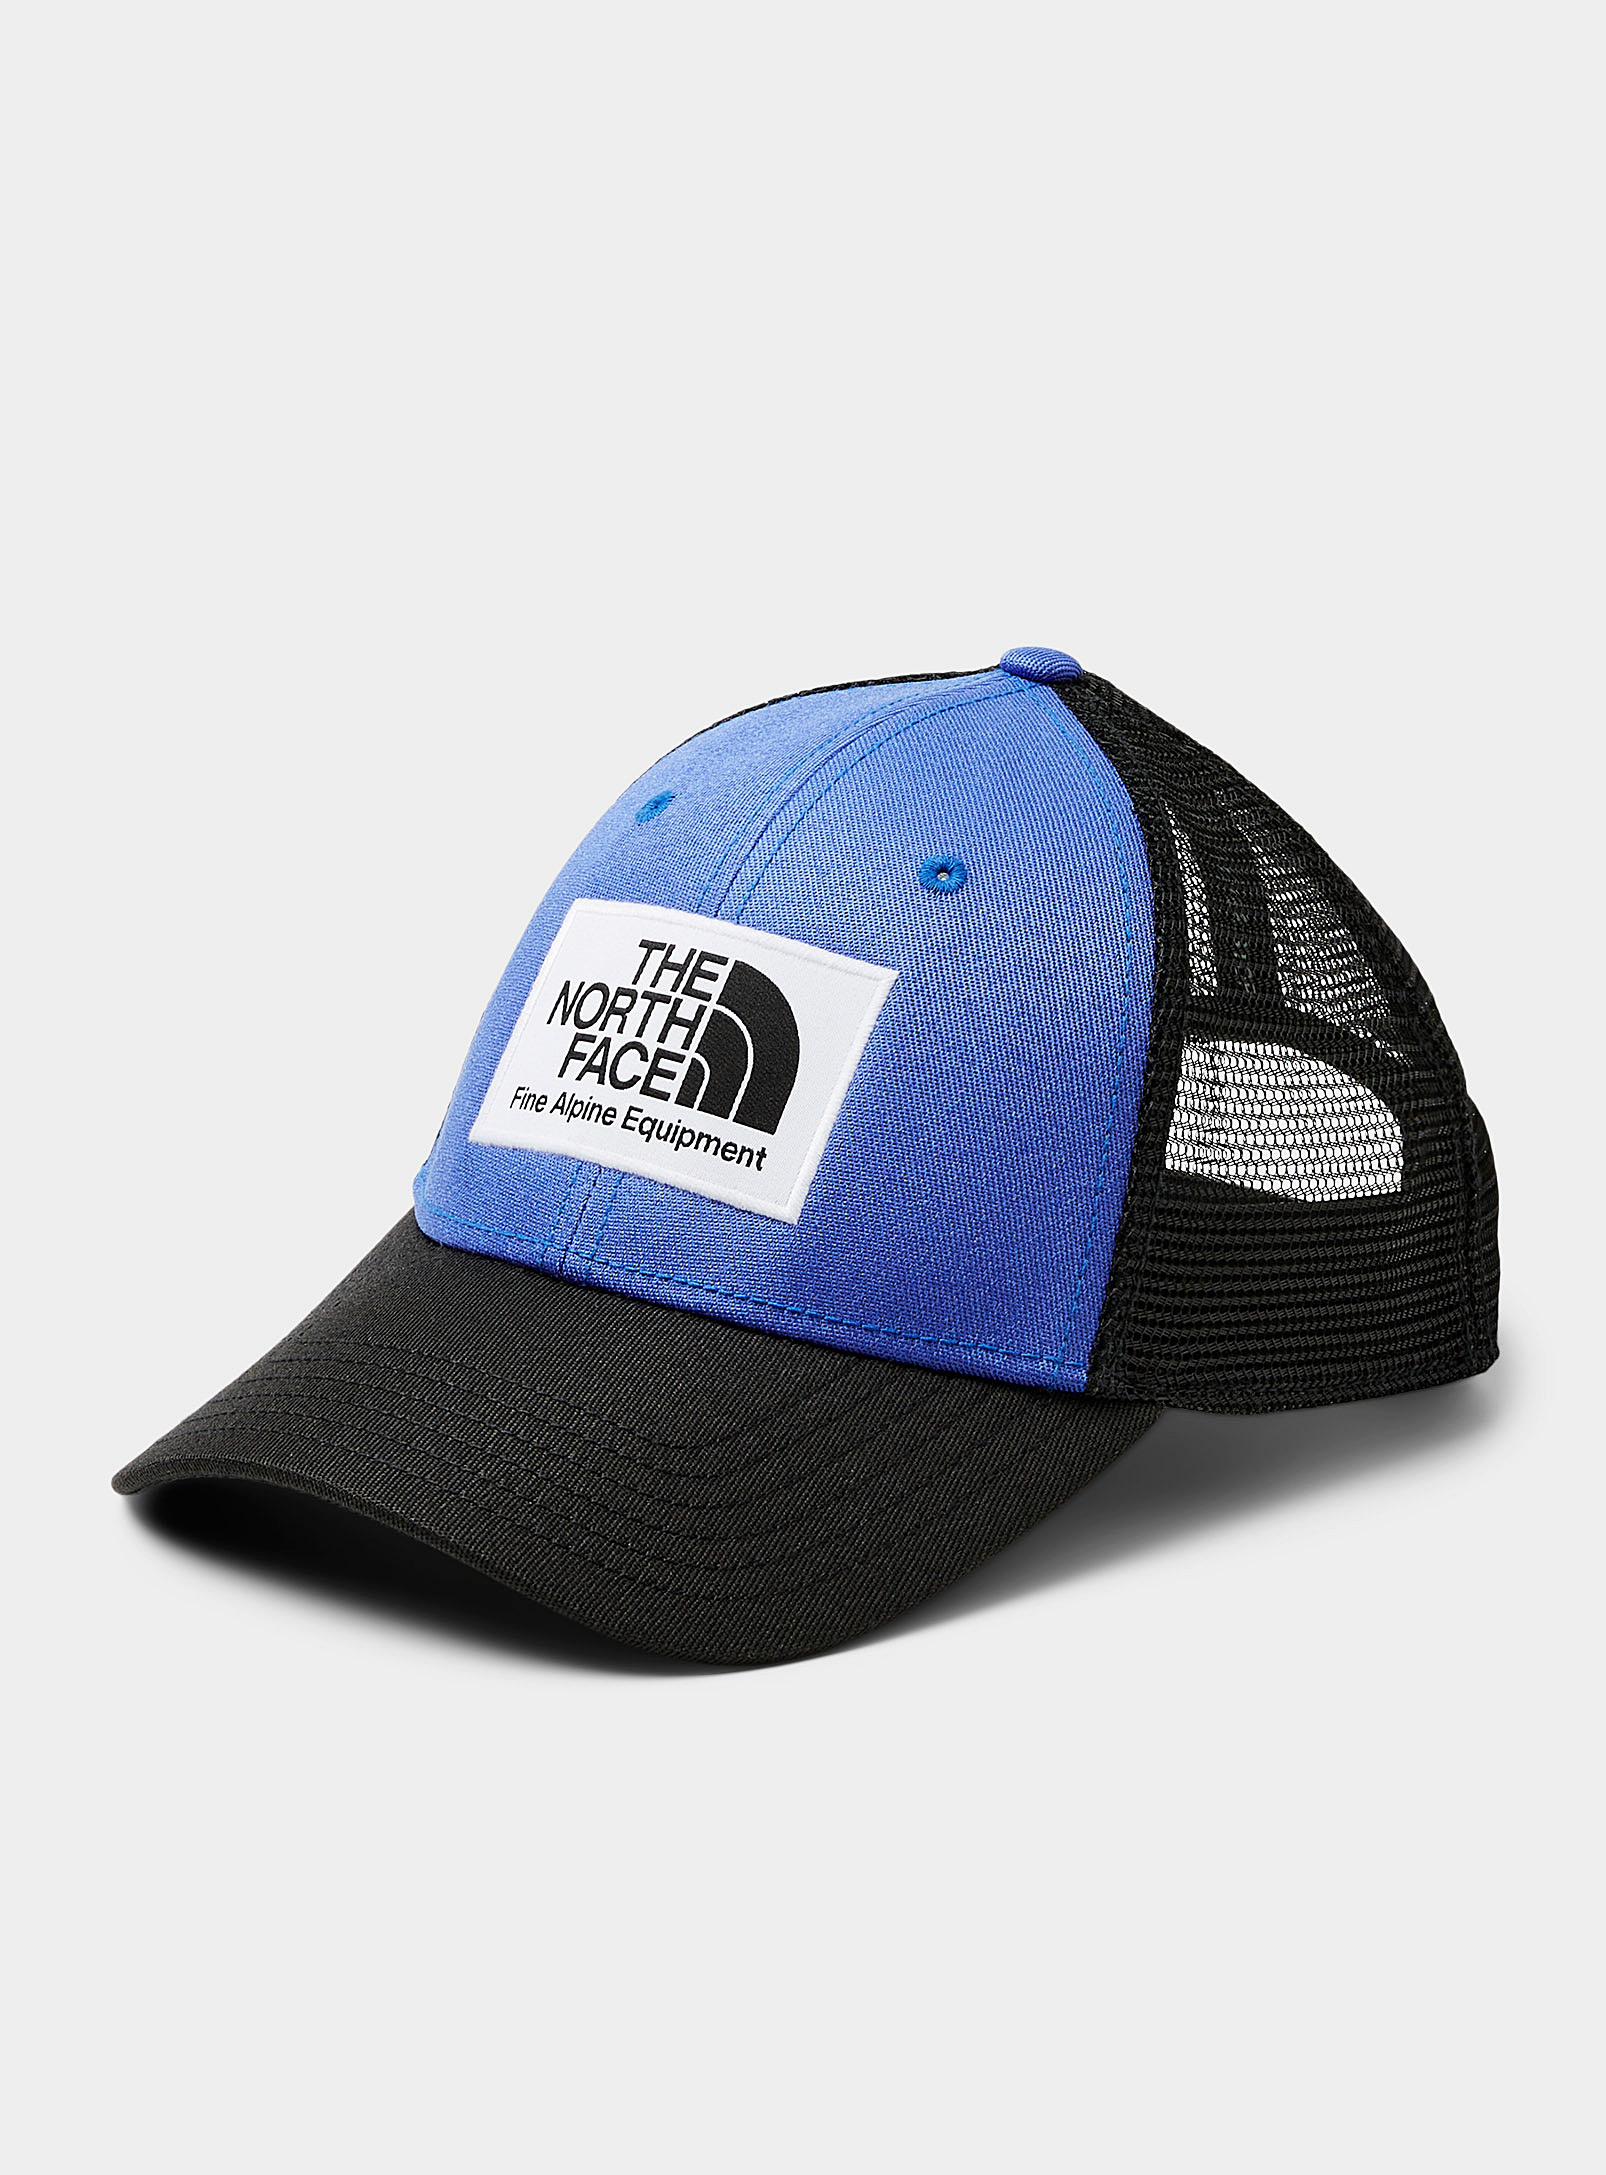 The North Face Mudder Trucker Cap In Blue